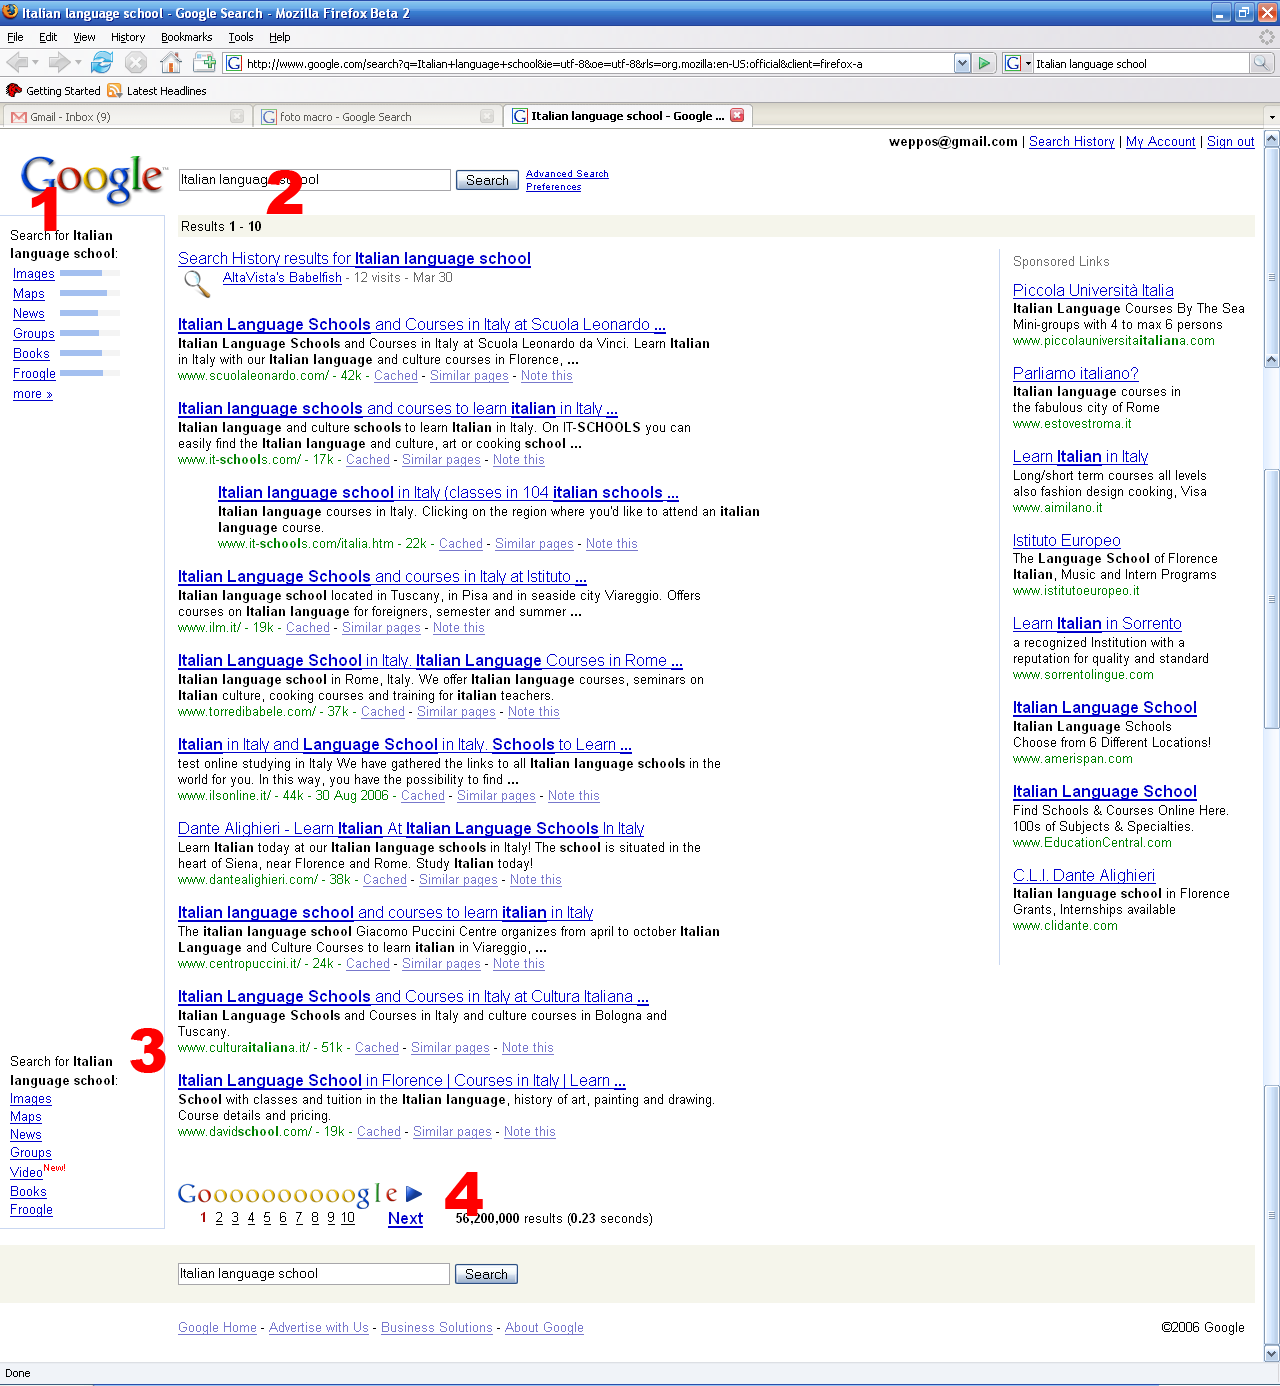 google-new-serp-note.png